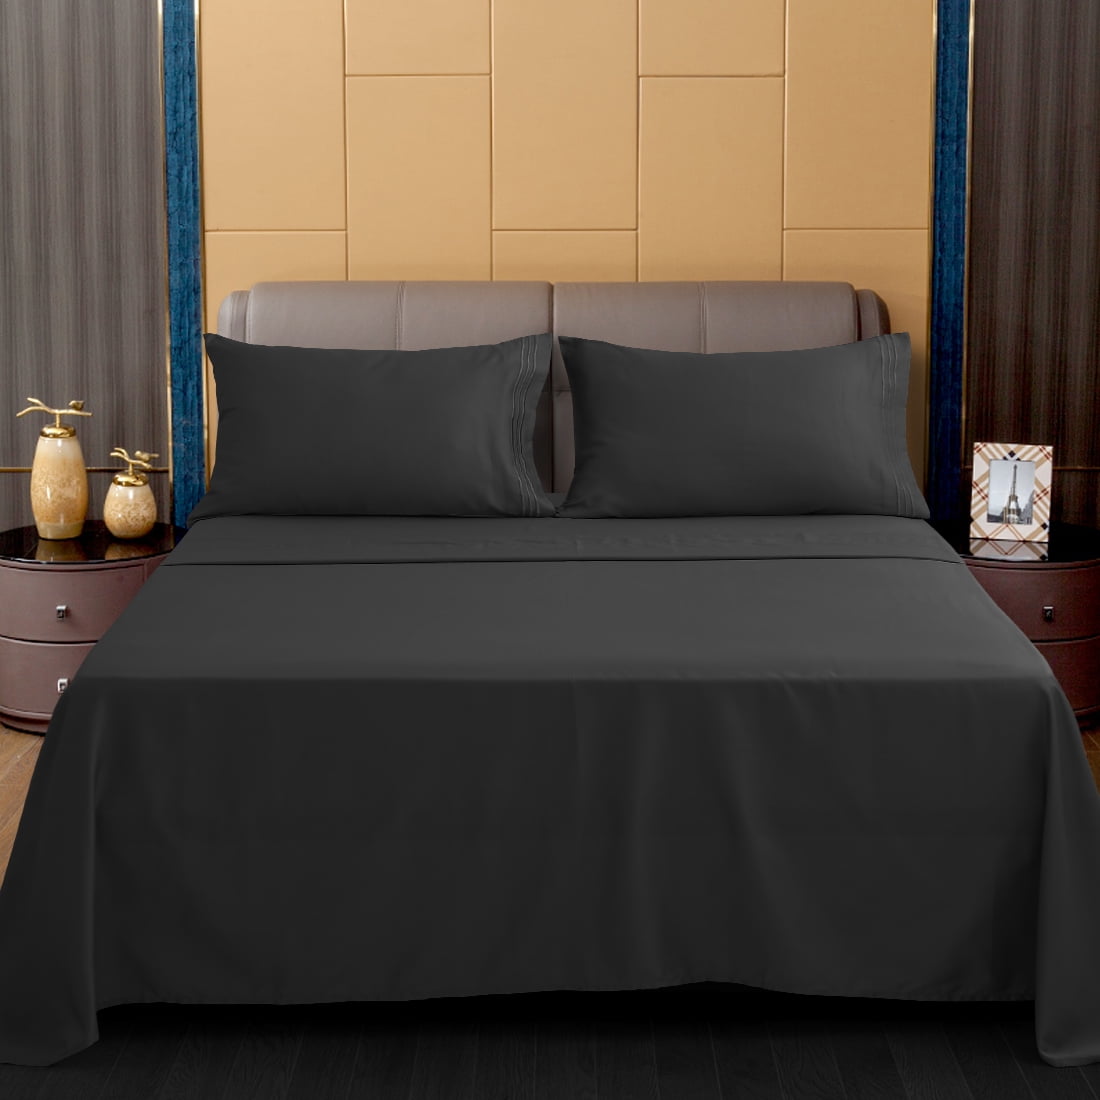 Details about   Deep Pocket Bedding Item US King 1000 Thread Count Egyptian Cotton All Colors 